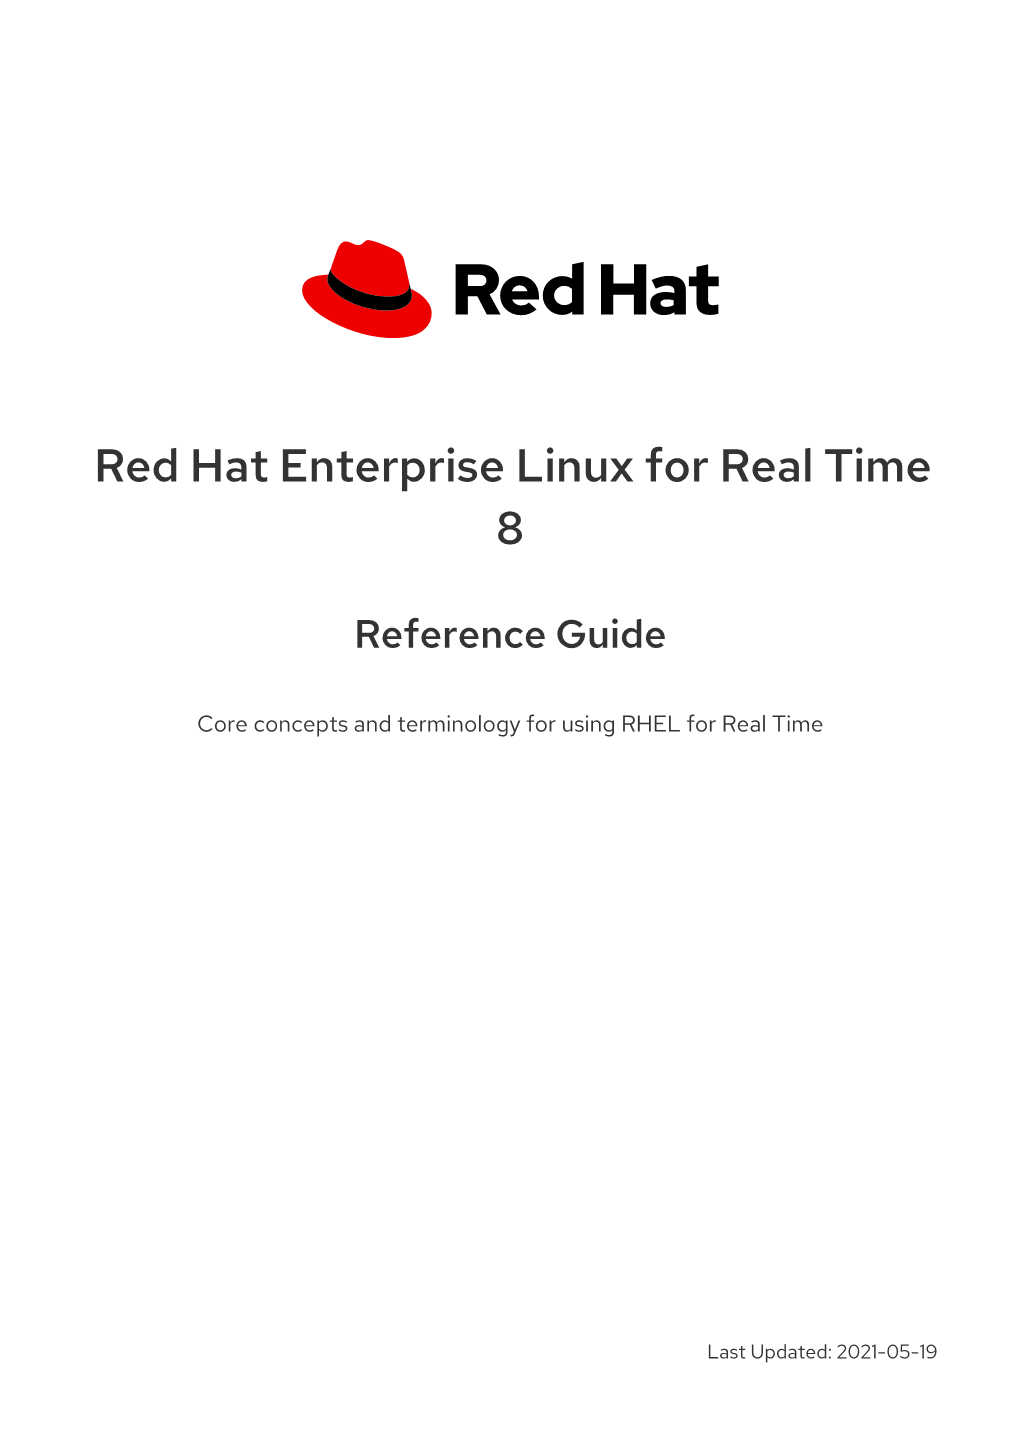 Red Hat Enterprise Linux for Real Time 8 Reference Guide